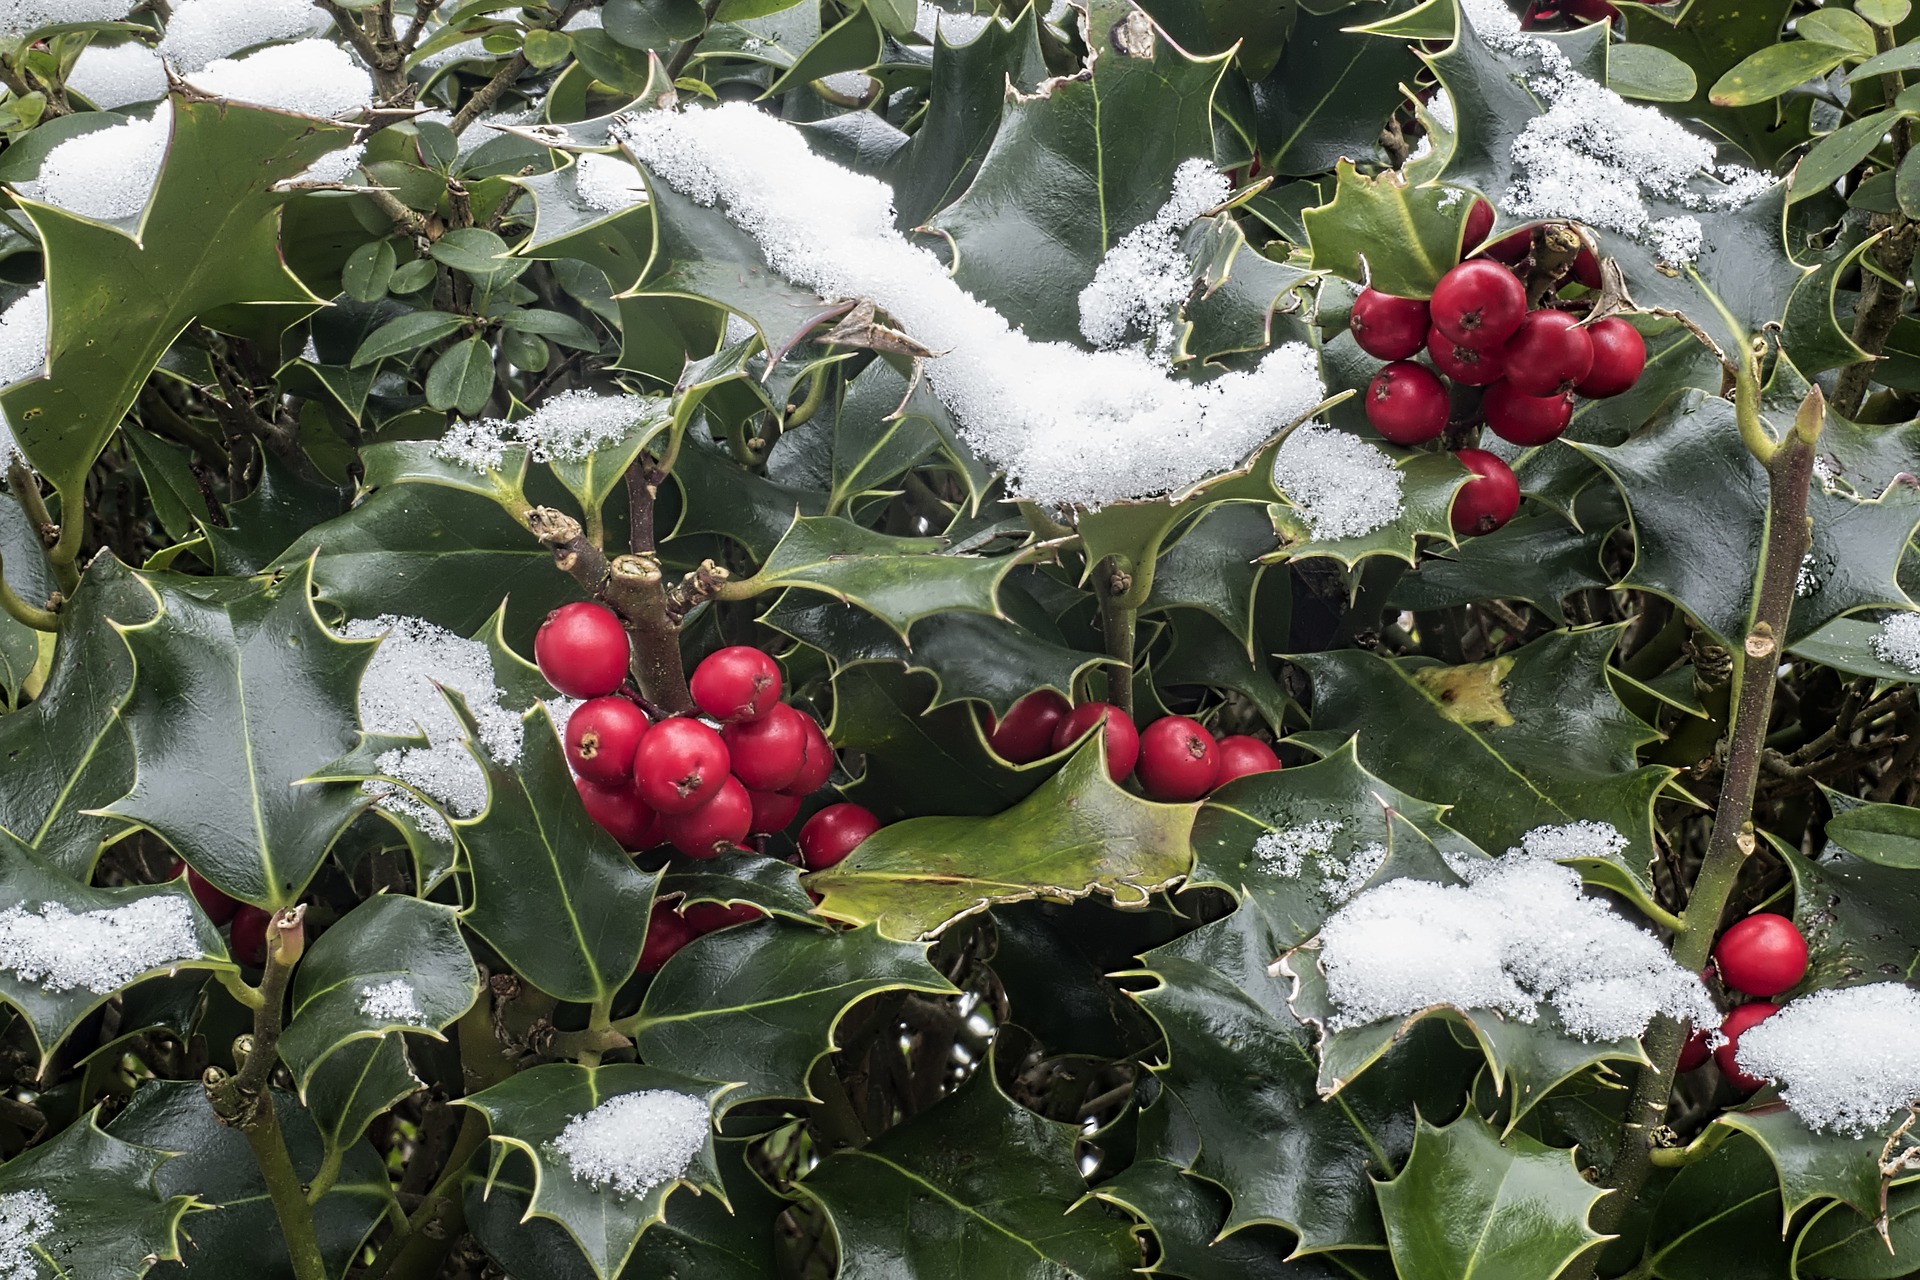 *Ilex* fruits and leaves in the snow. Image by [Wolfgang Claussen](https://pixabay.com/es/users/WolfBlur-2503887/) at [Pixabay](https://pixabay.com/es/photos/holly-ilex-aquifolium-la-nieve-3012084/).